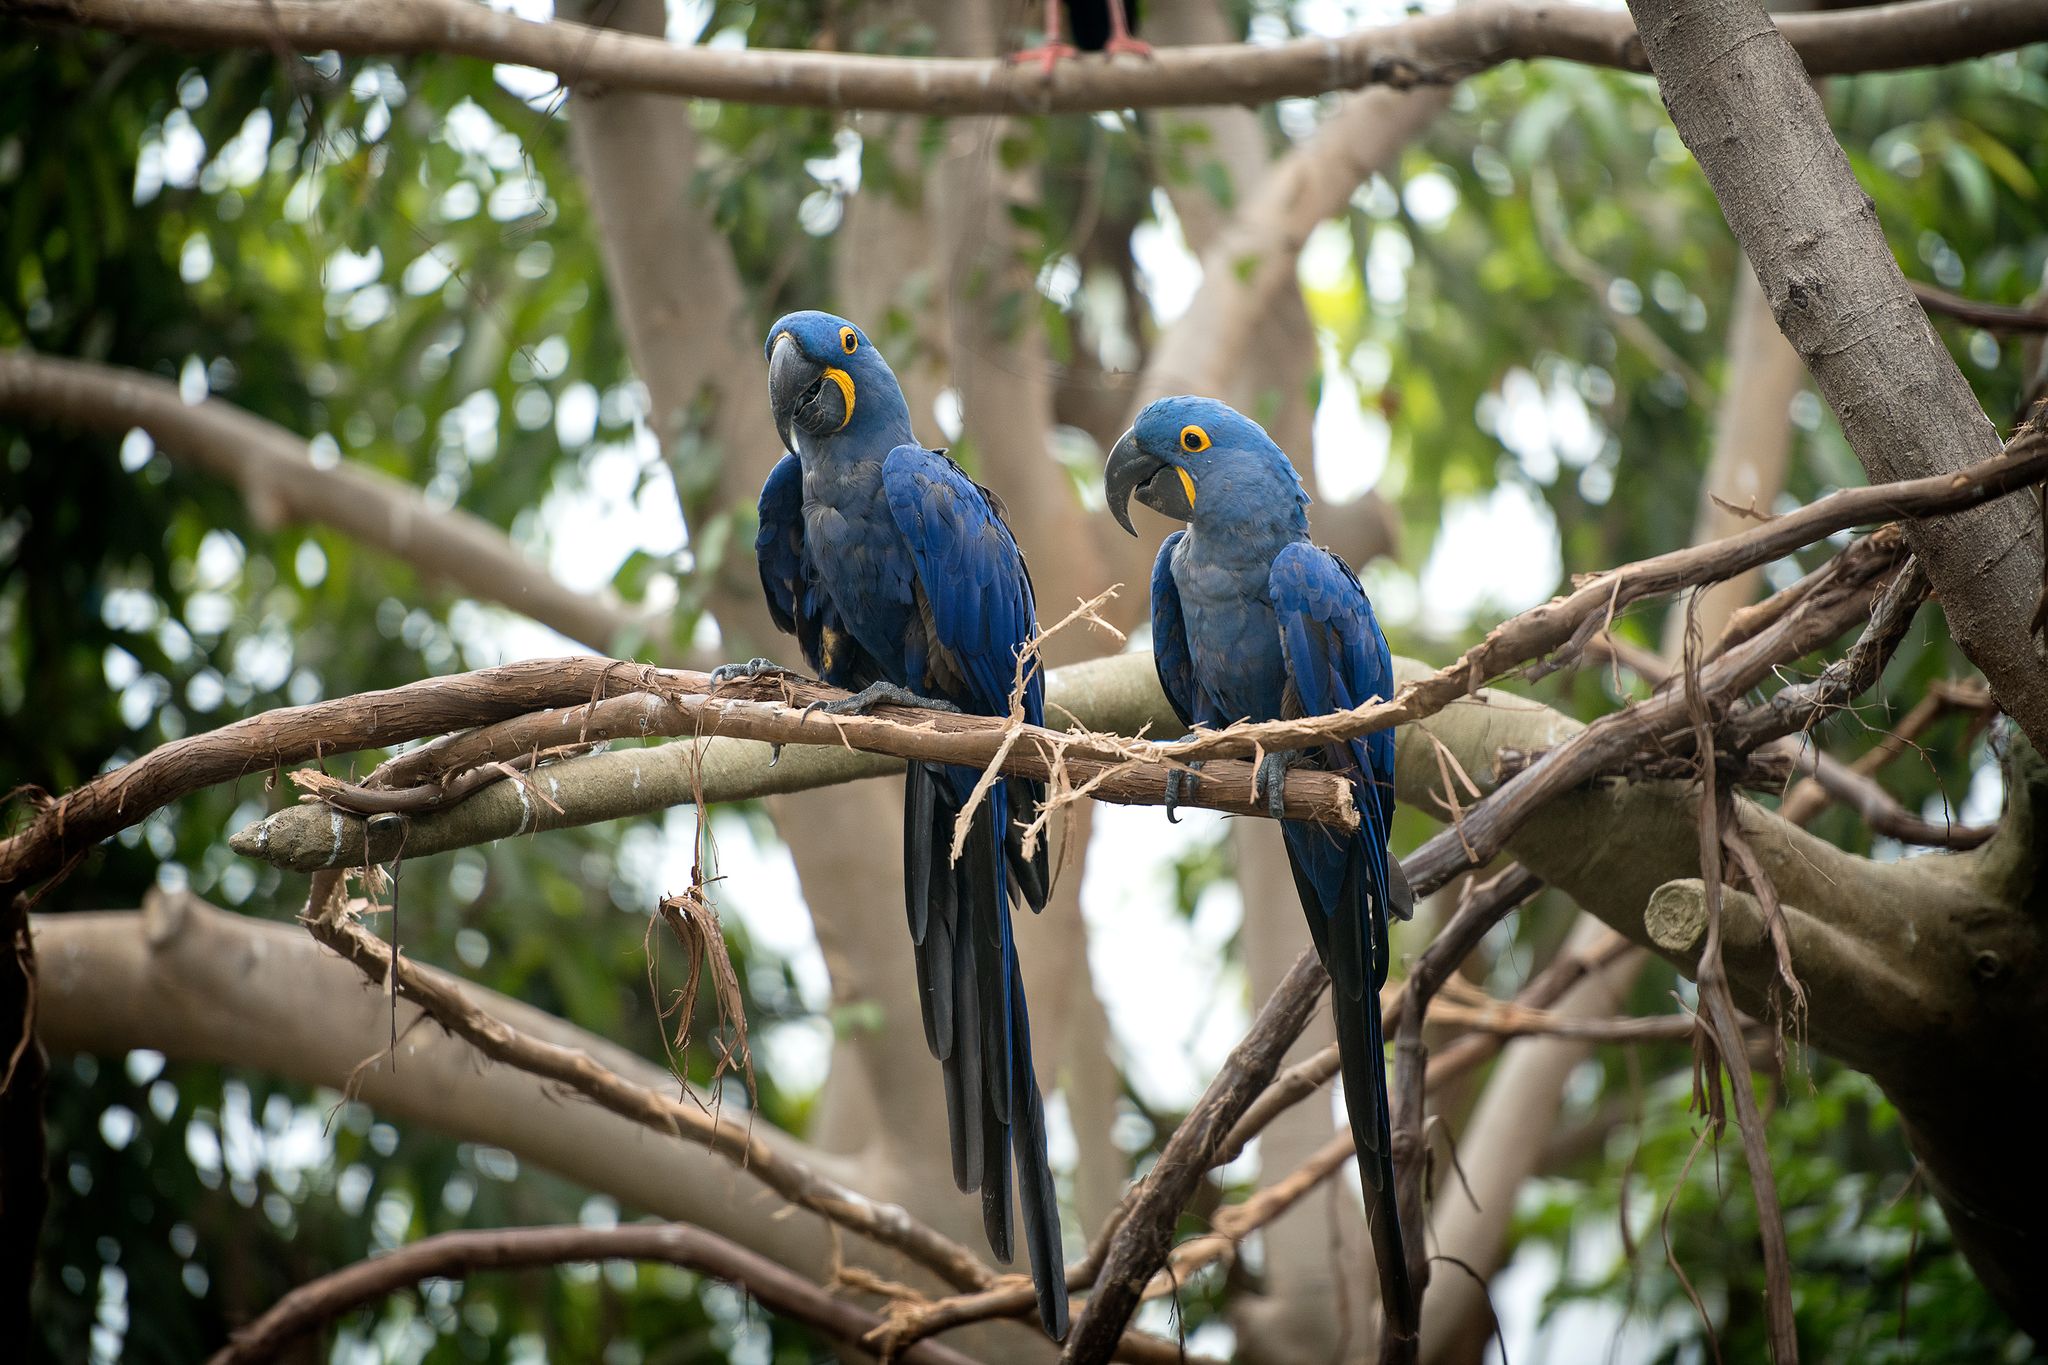 Two Hyacinth Macaws perched on a branch